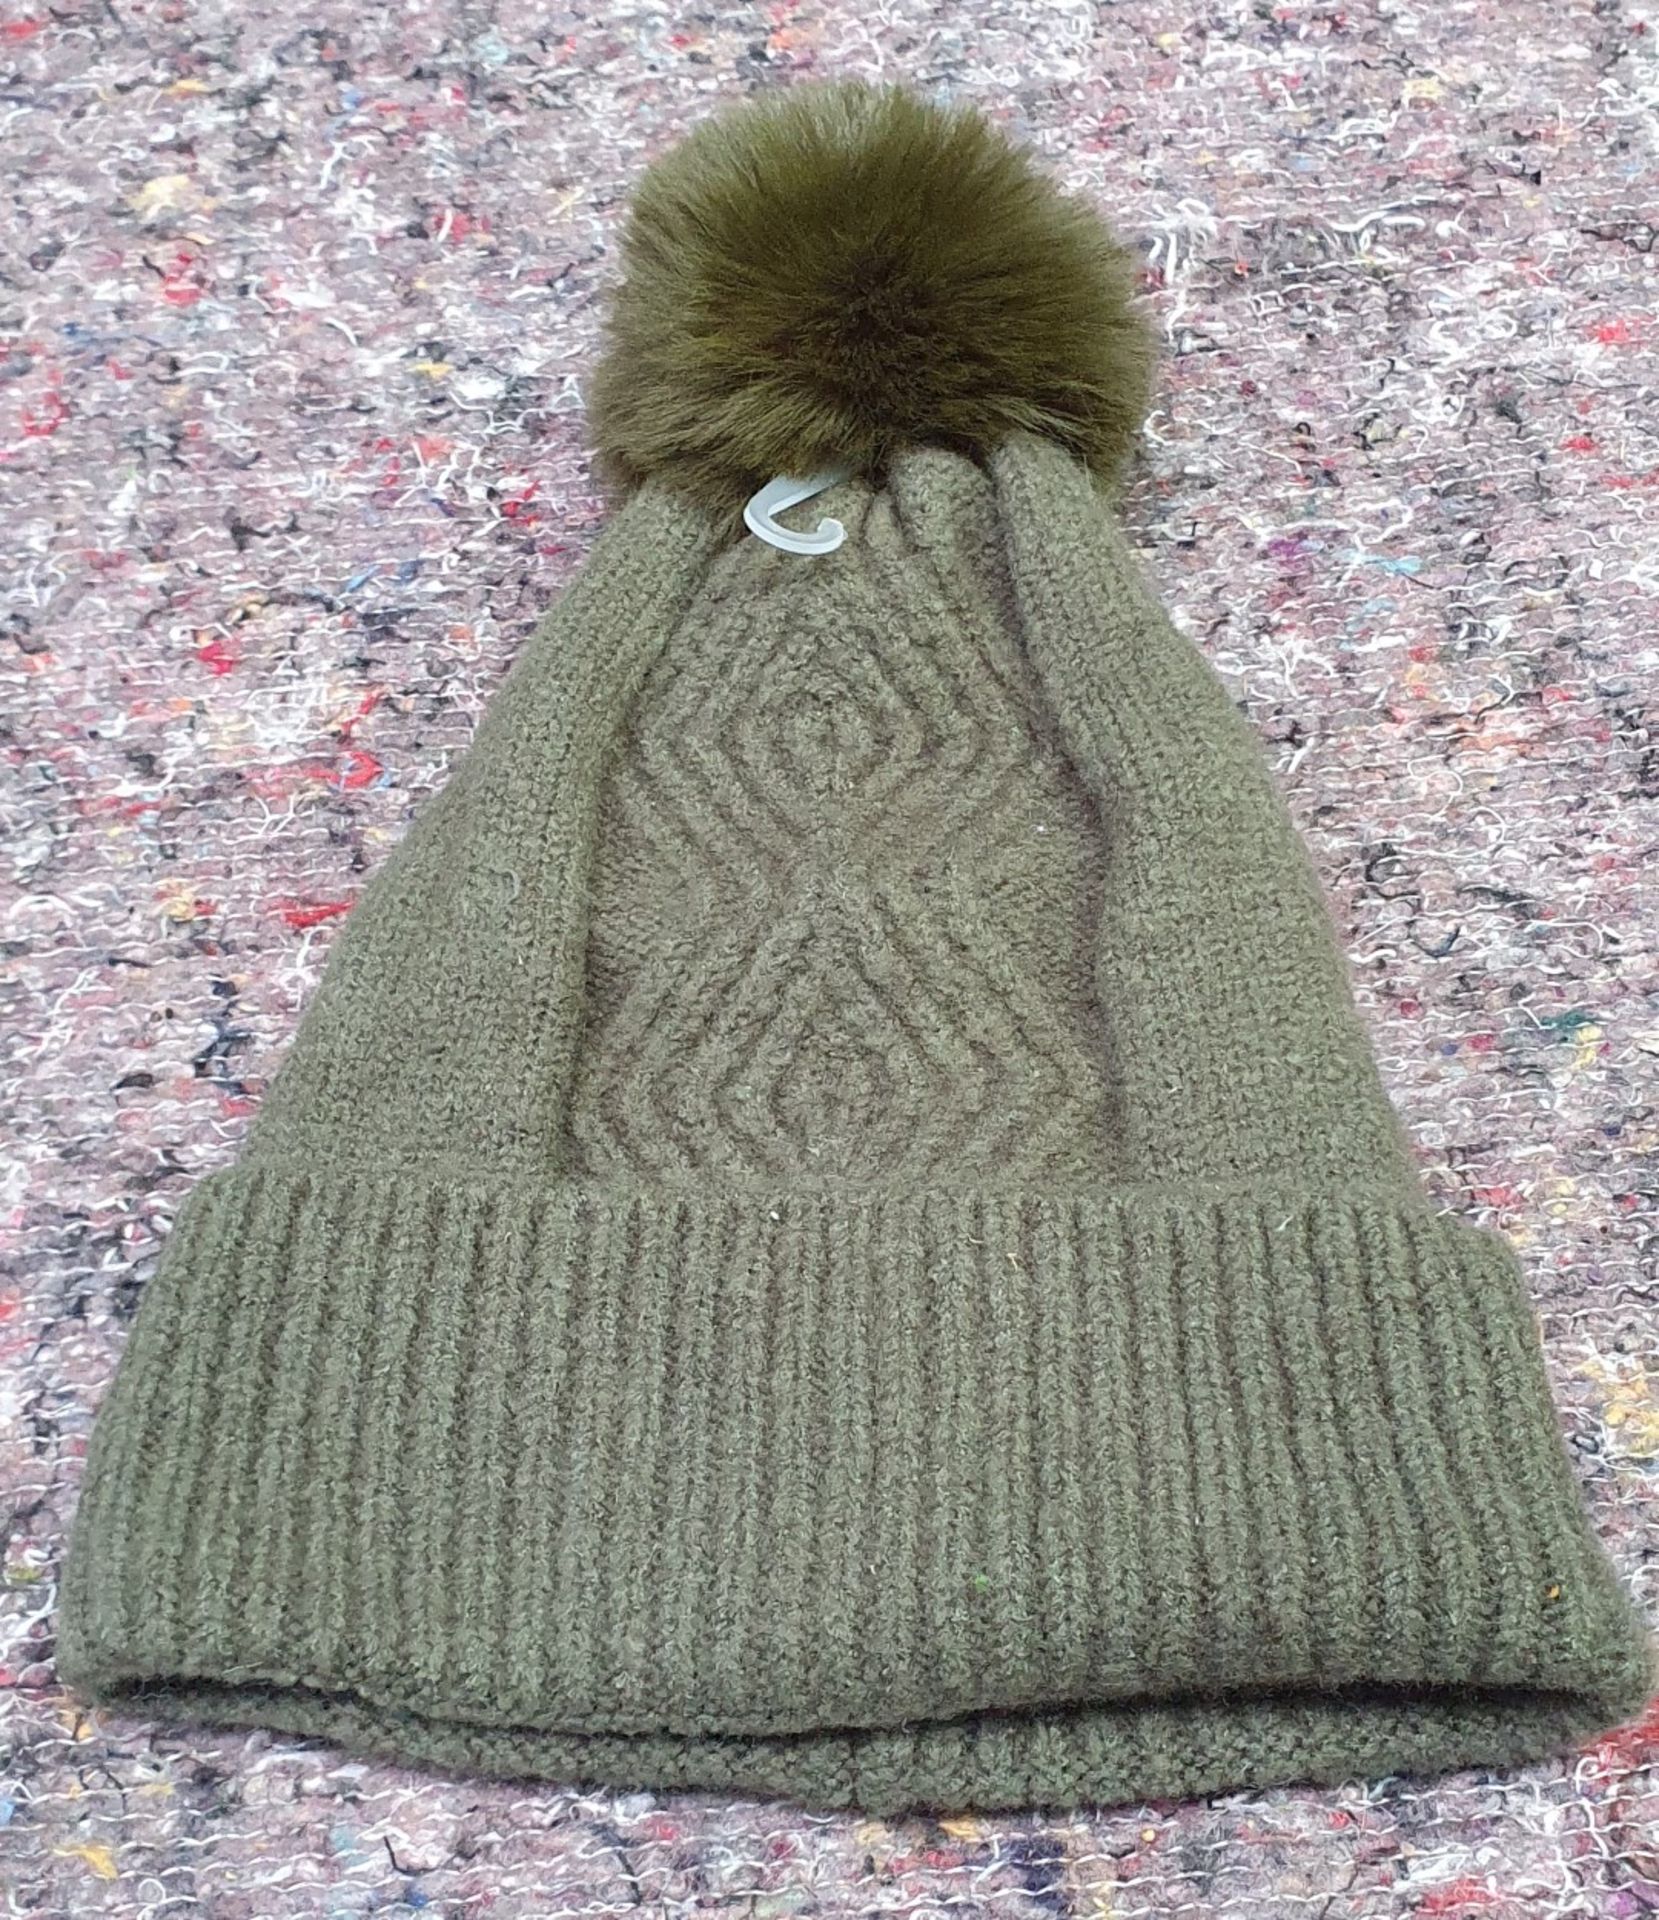 13 x Assorted Bobble Hats and Woolly Gloves by From The Source - New Stock - Ref: TCH236 - CL840 - - Image 2 of 24